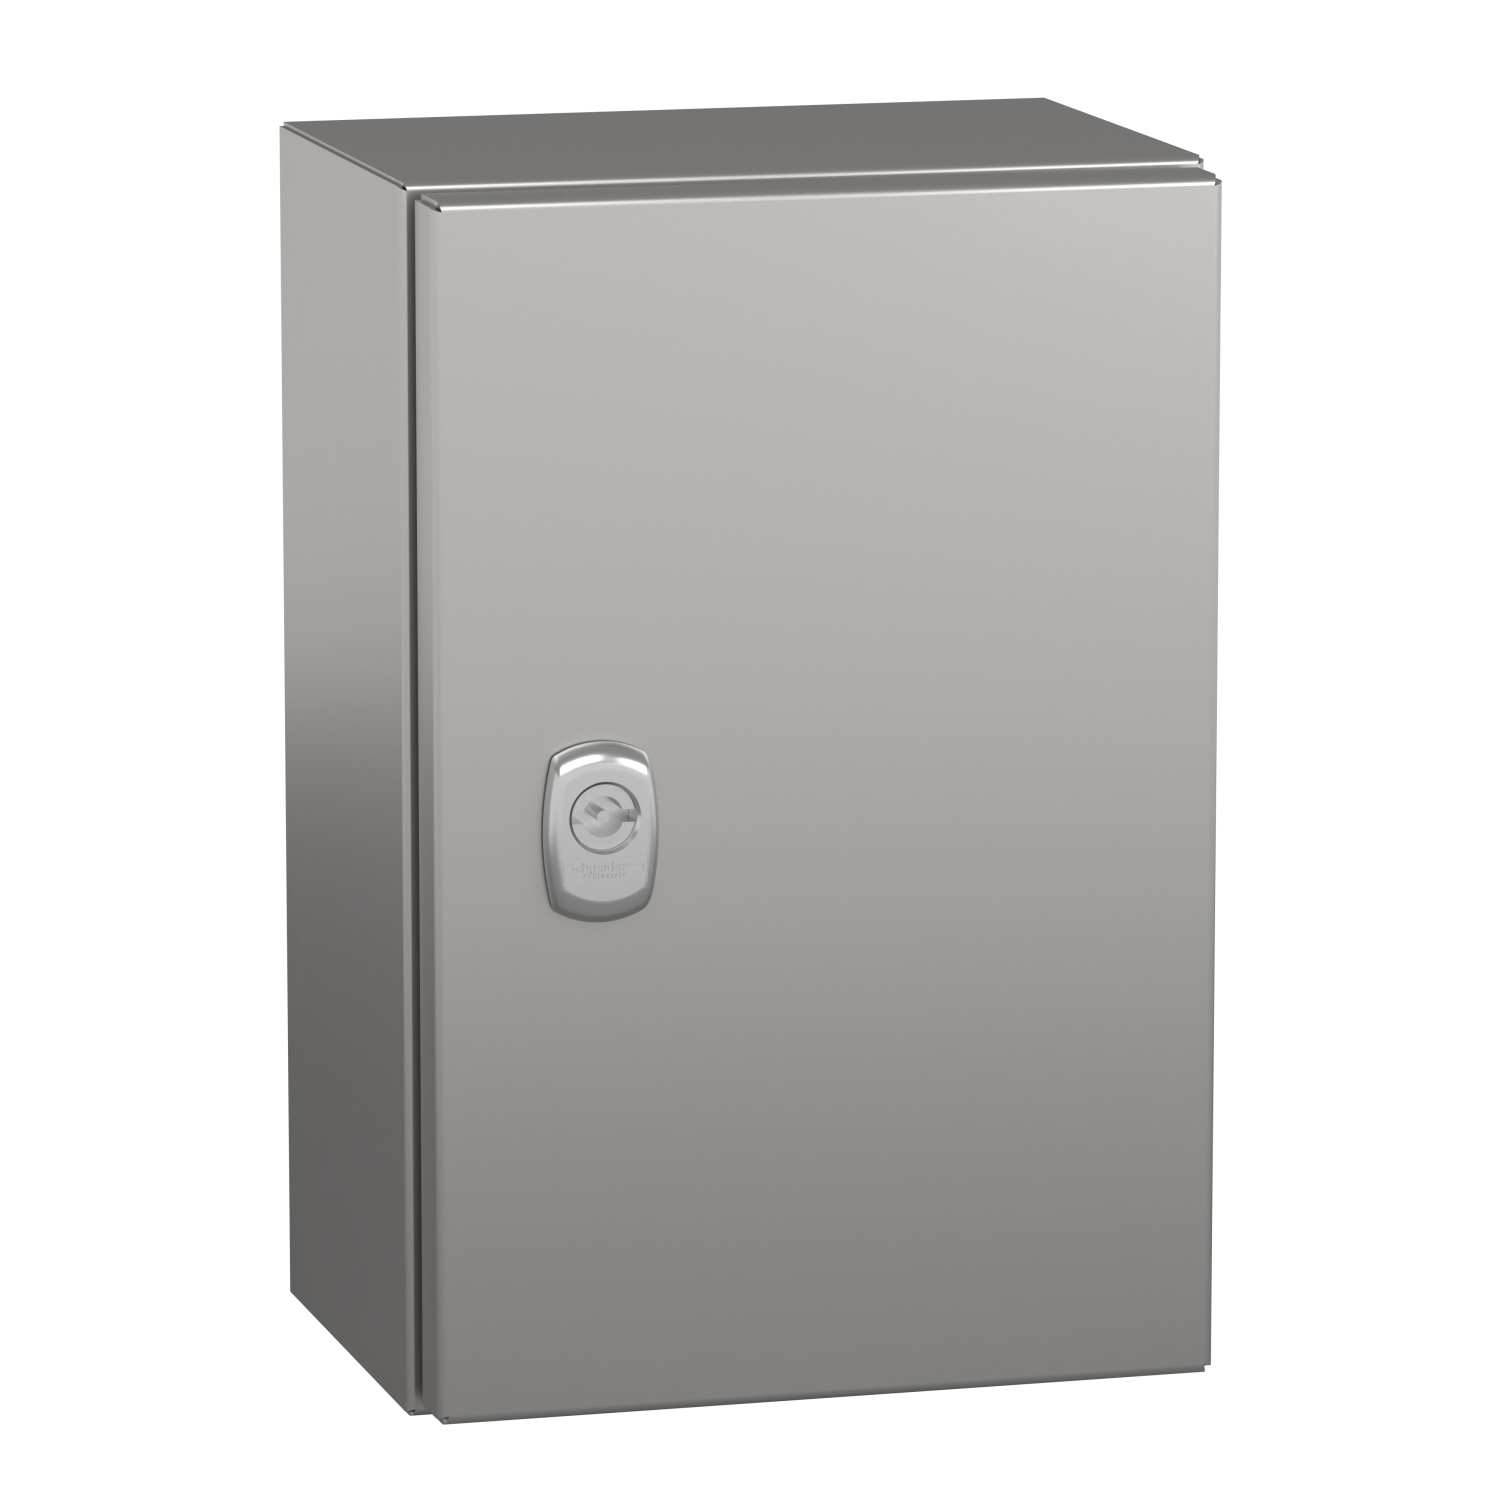 Wall mounted enclosure, Spacial S3X, stainless steel 304L, plain door, 300x200x150mm, IP66